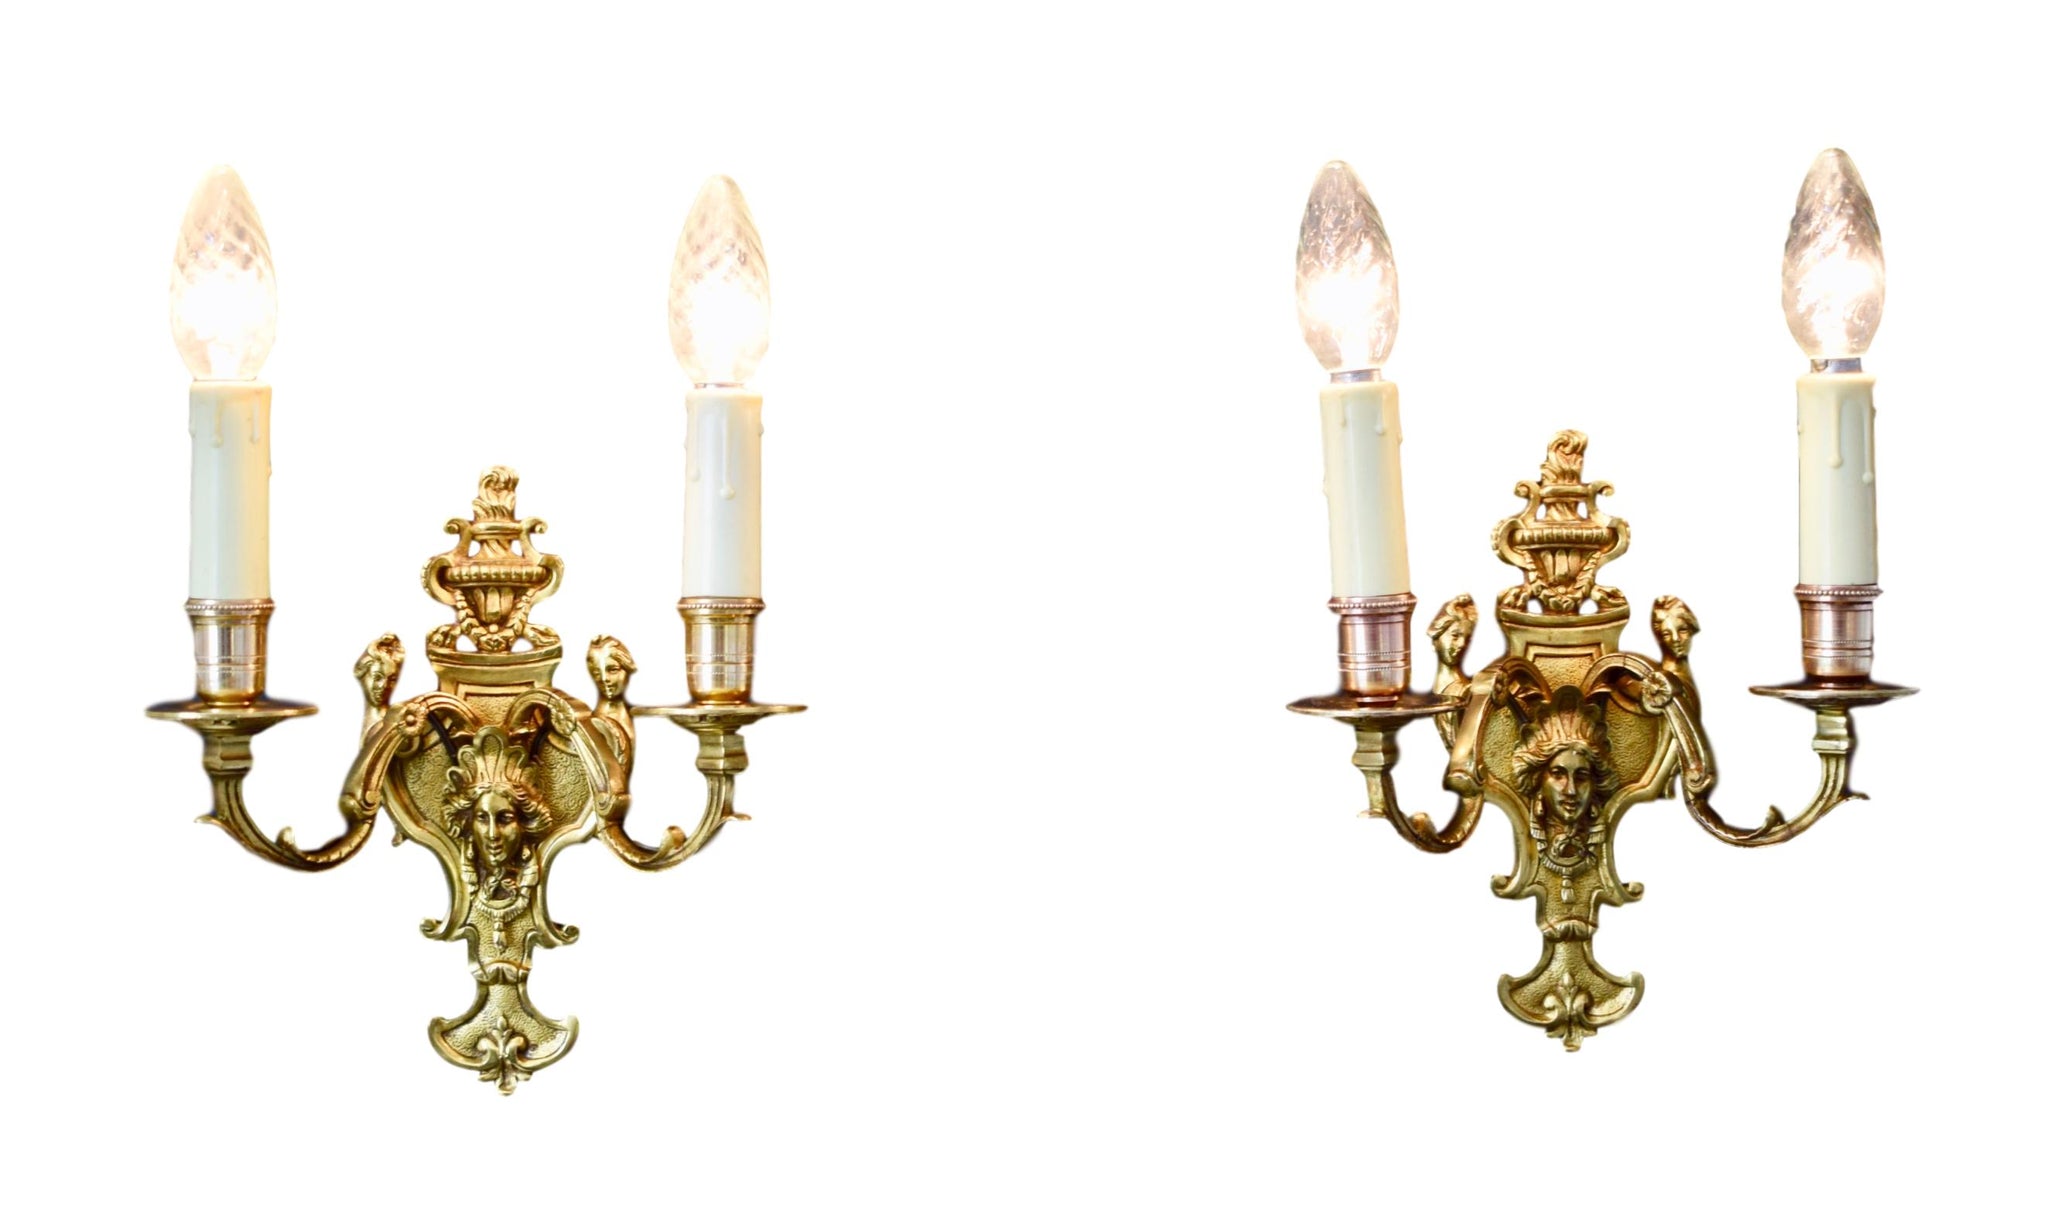 Regency Pair of Wall Sconces - Charmantiques